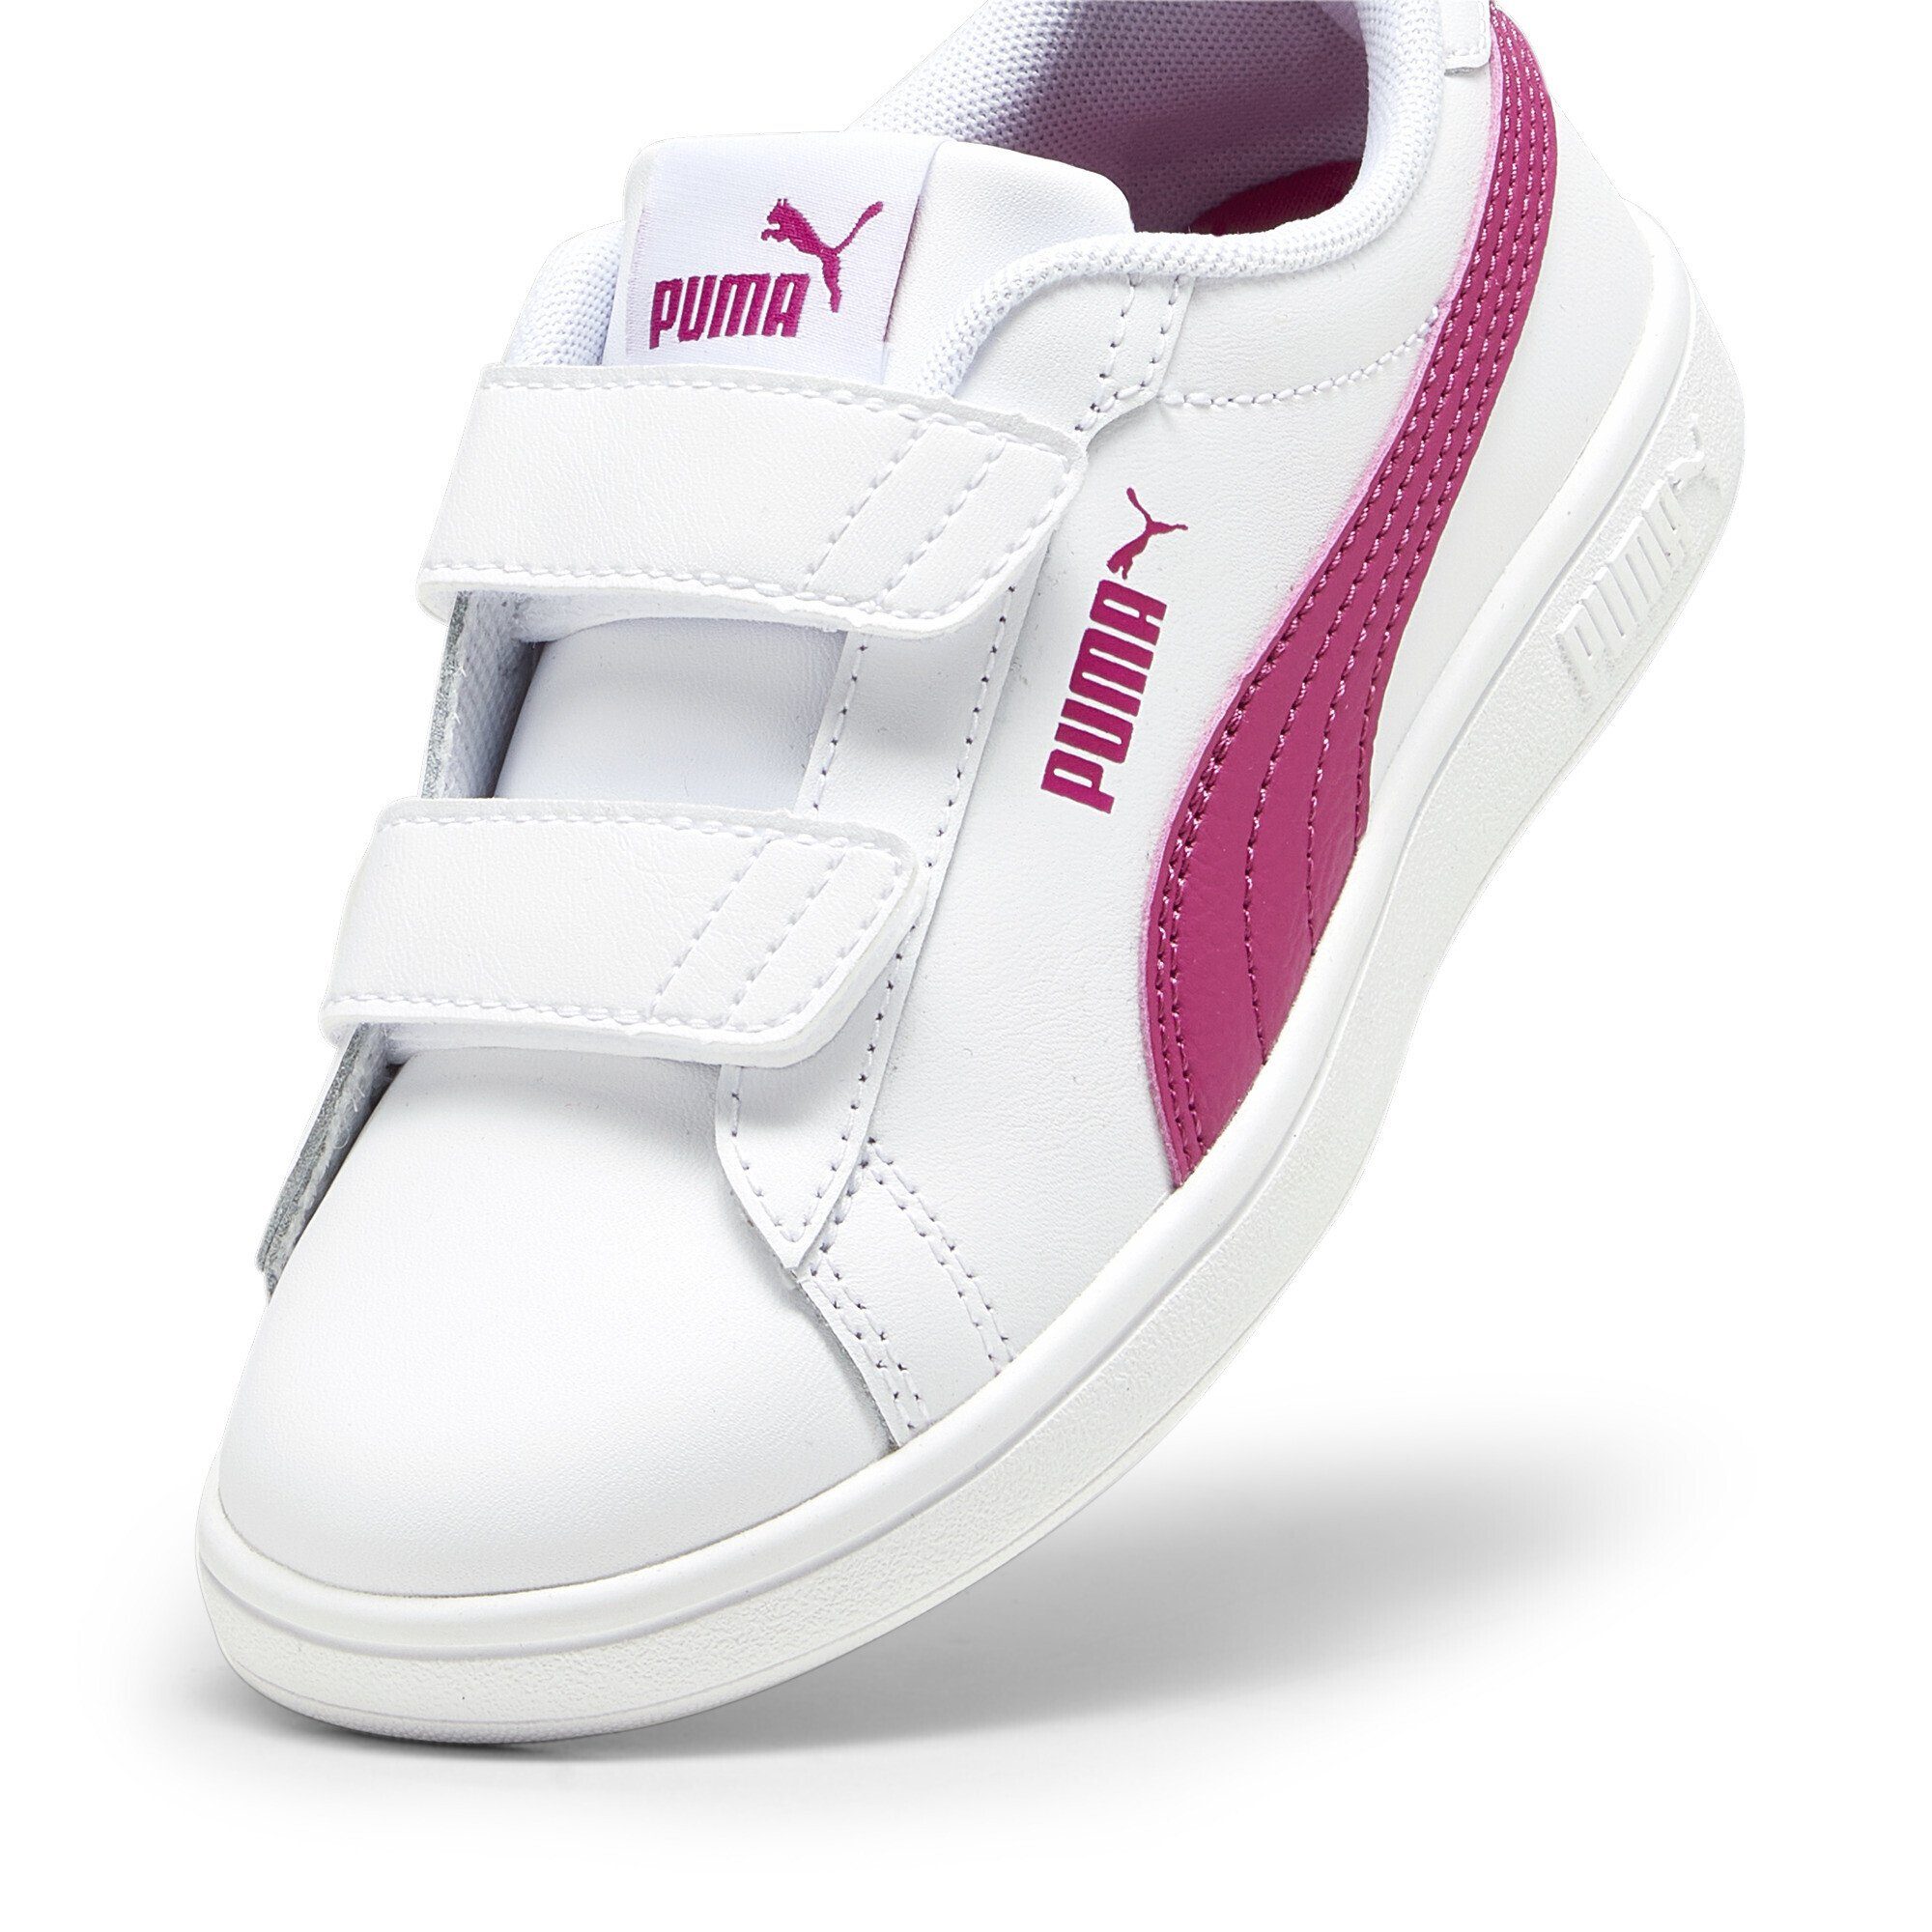 PUMA Smash 3.0 Leather White Sneaker Pink Sneakers Pinktastic